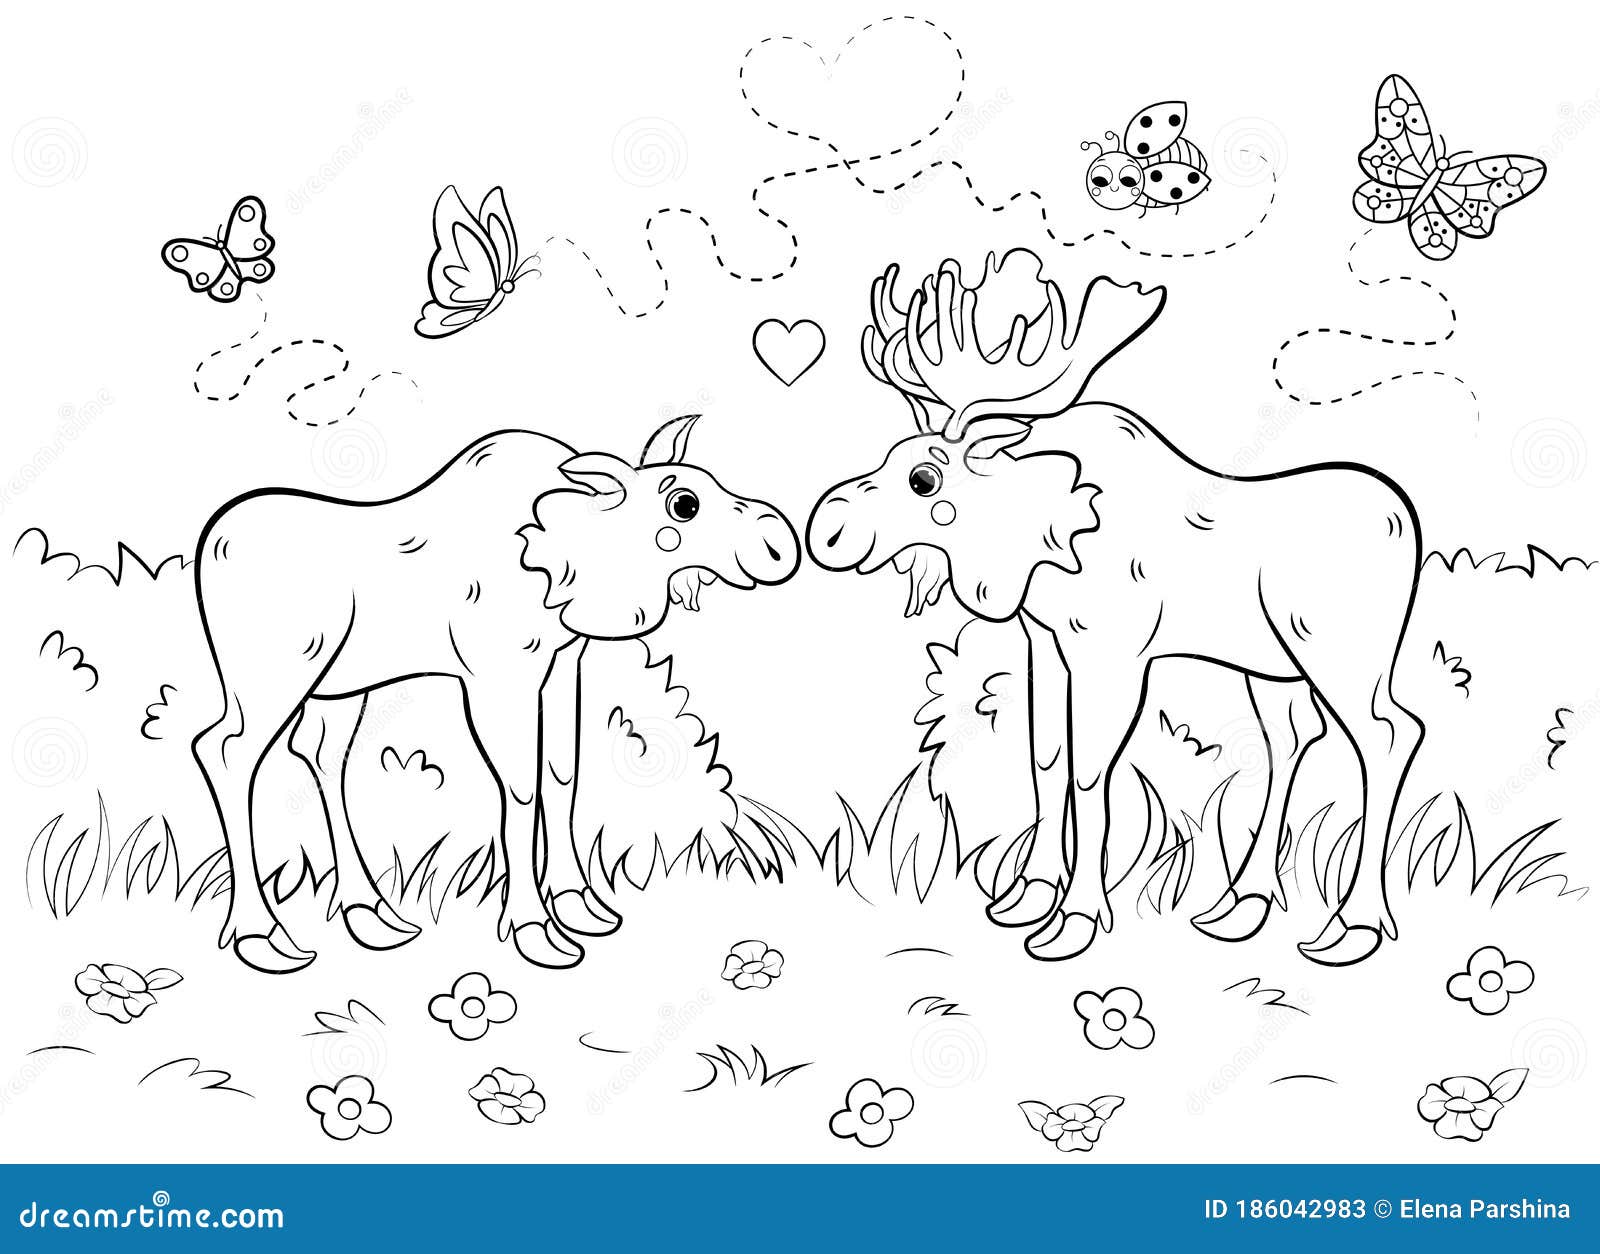 Moose Coloring Page Stock Illustrations – 20 Moose Coloring Page ...